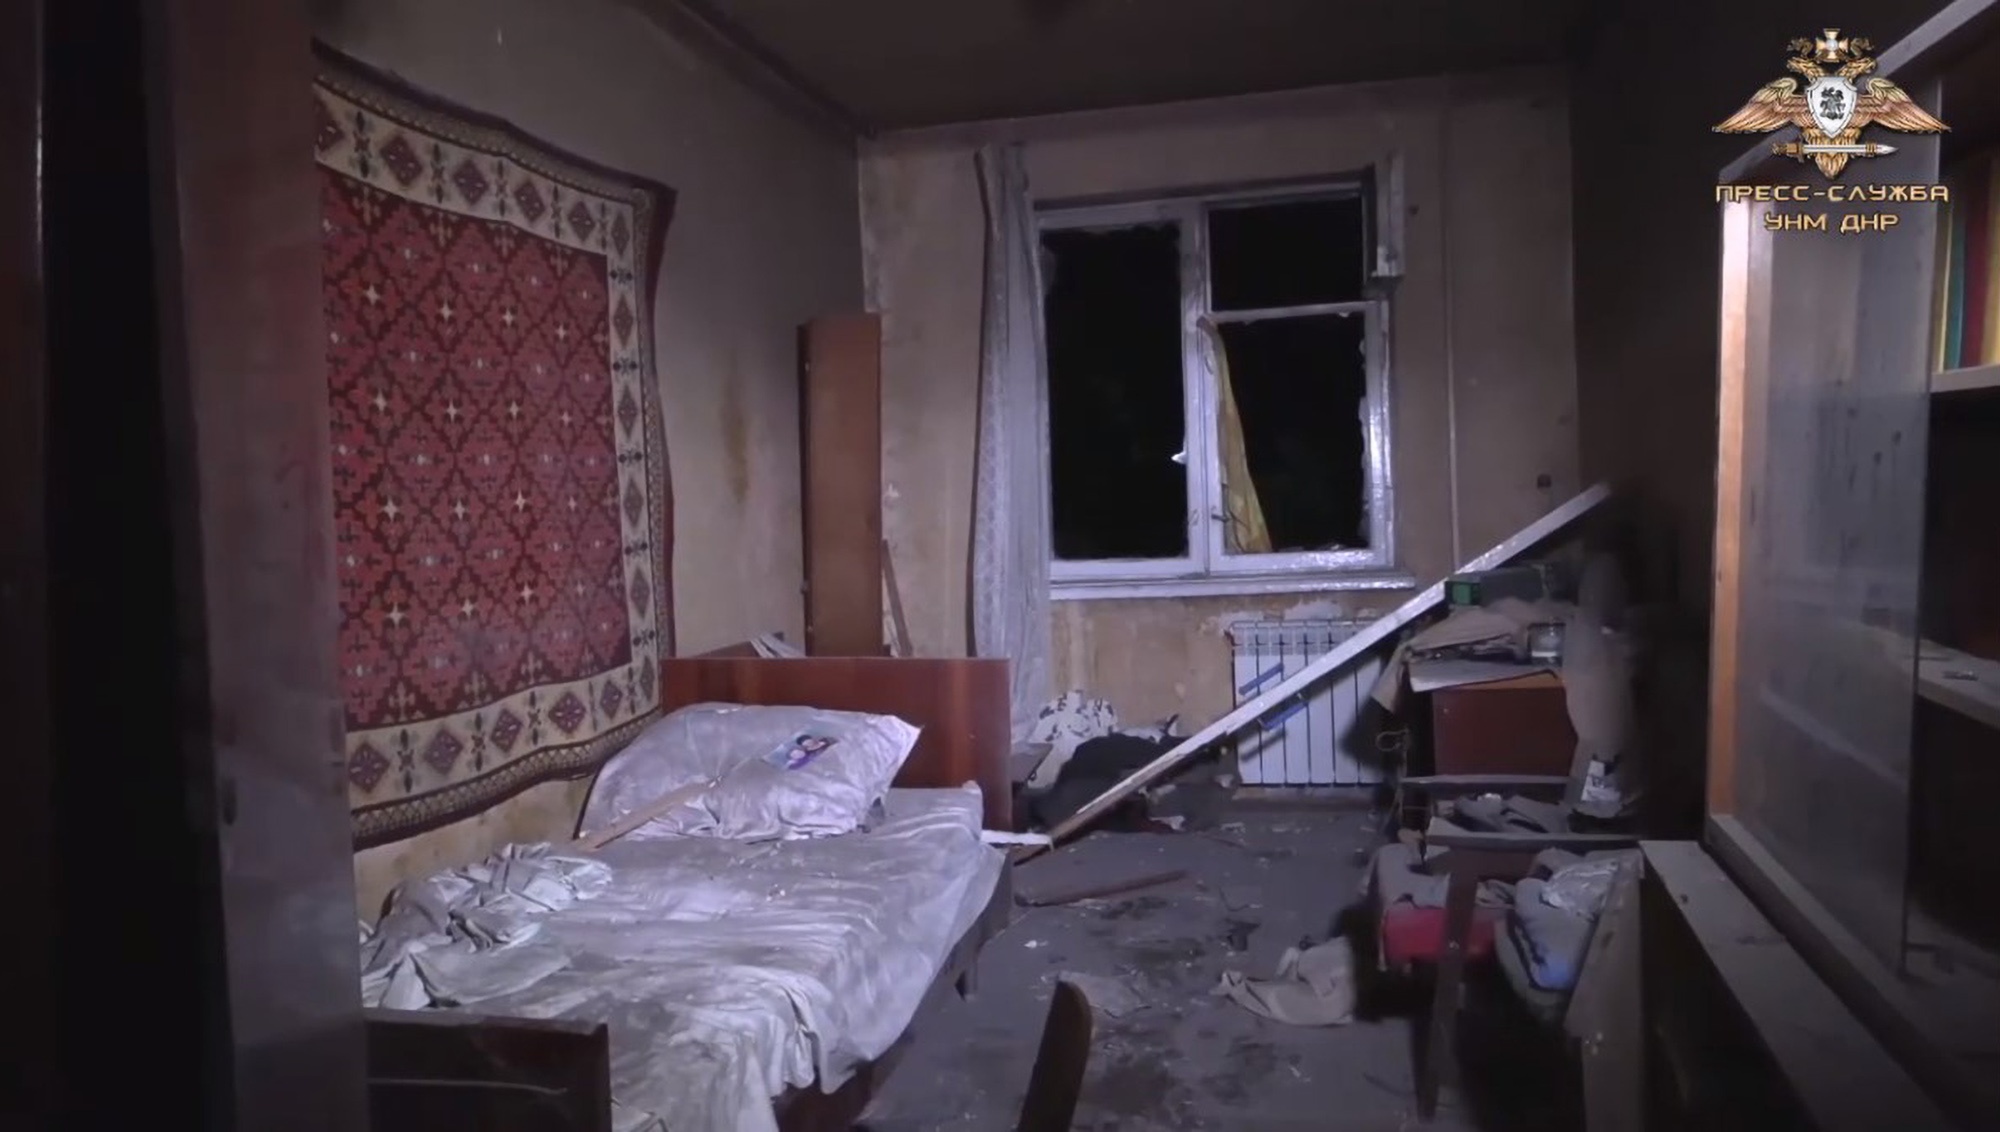 Read more about the article WAR IN UKRAINE: DPR Claims Ukrainian Soldiers Bombed Homes And Schools In Donetsk